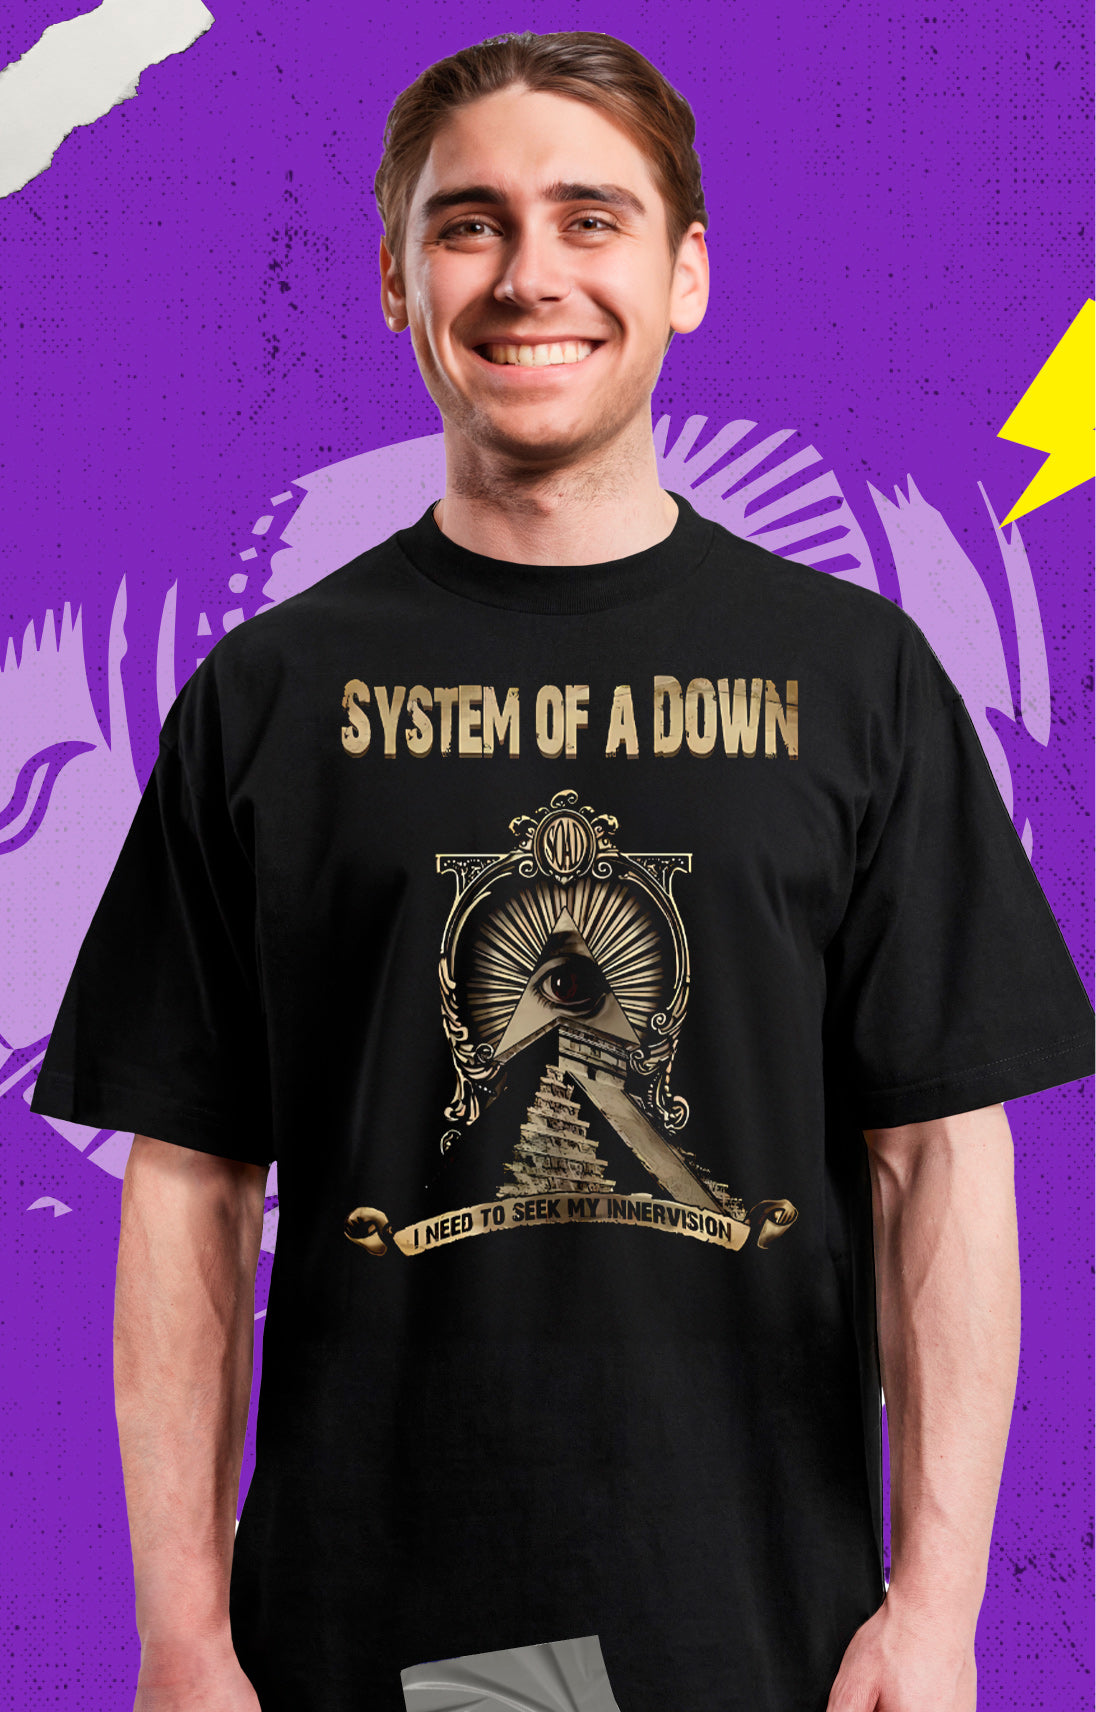 System Of a Down - I need to seek - Polera